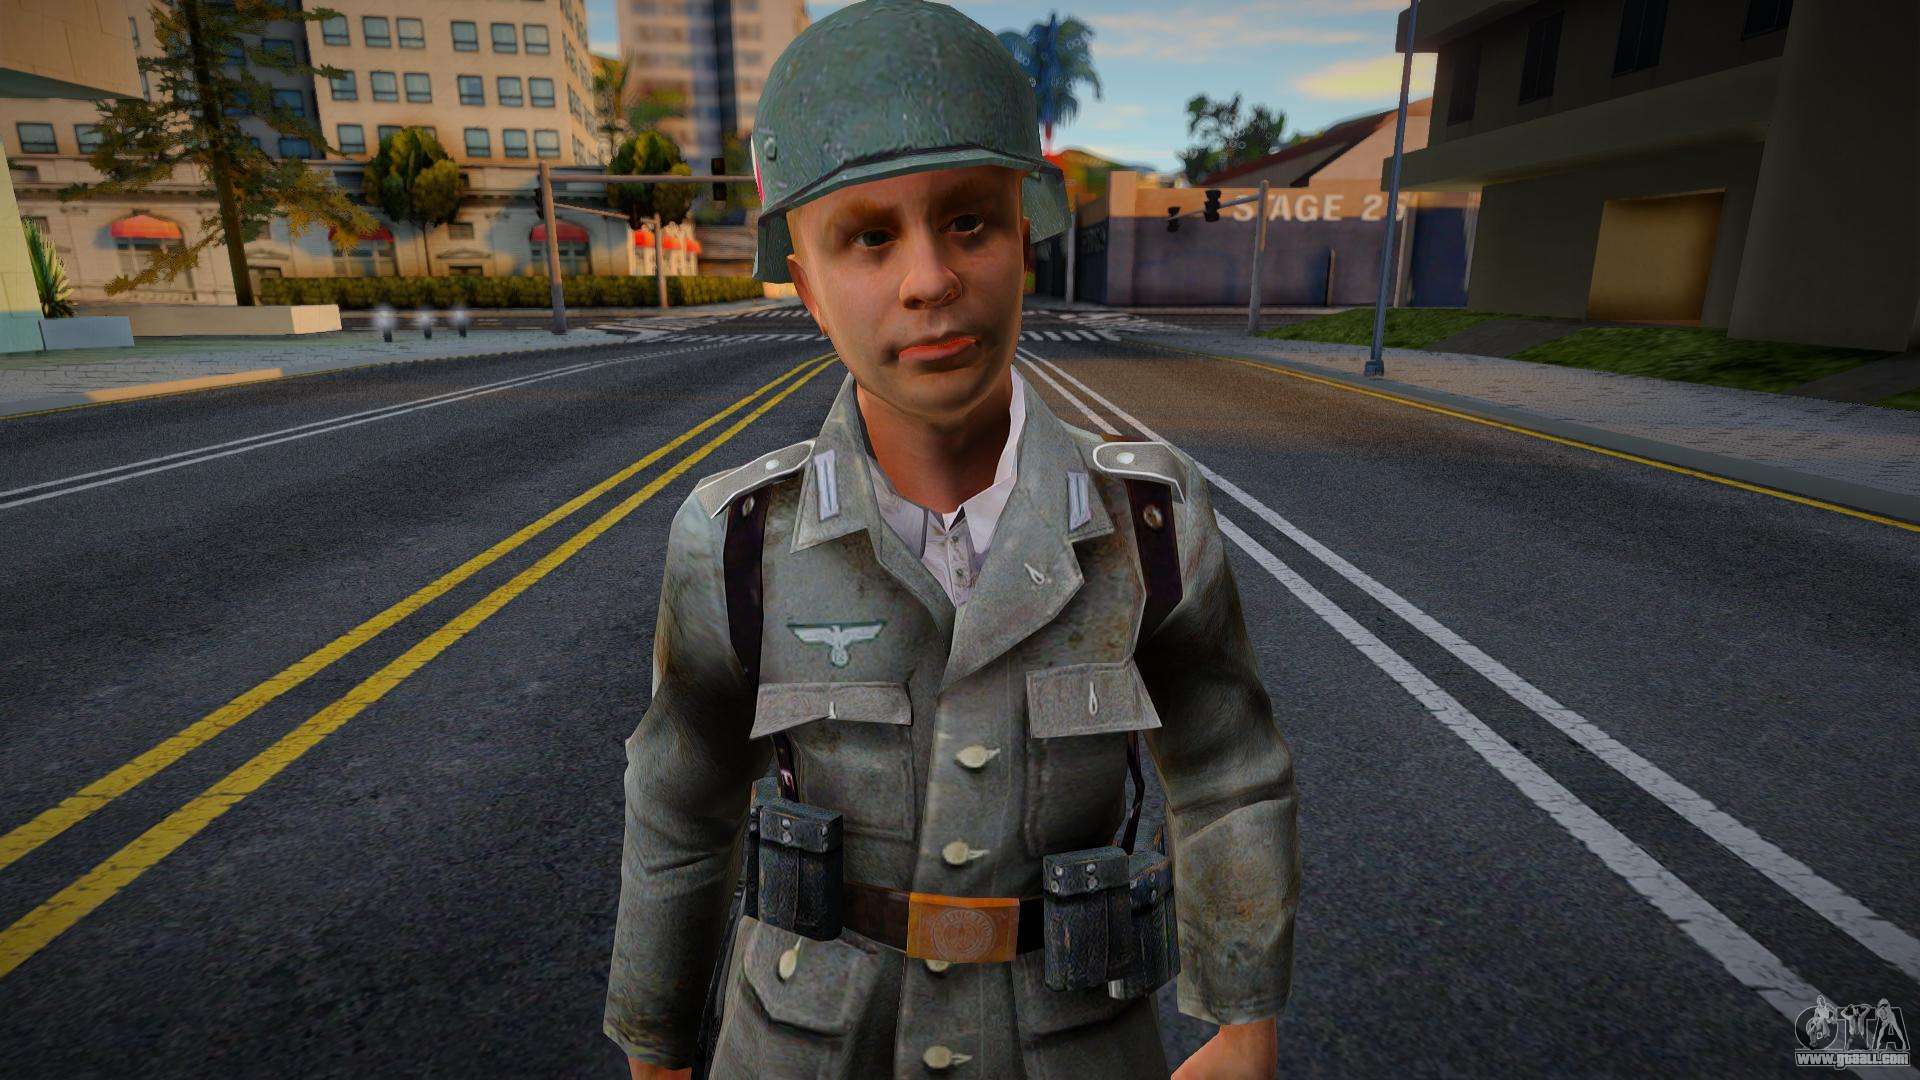 German soldier V2 (Normandy) from Call of Duty 2 for GTA San Andreas